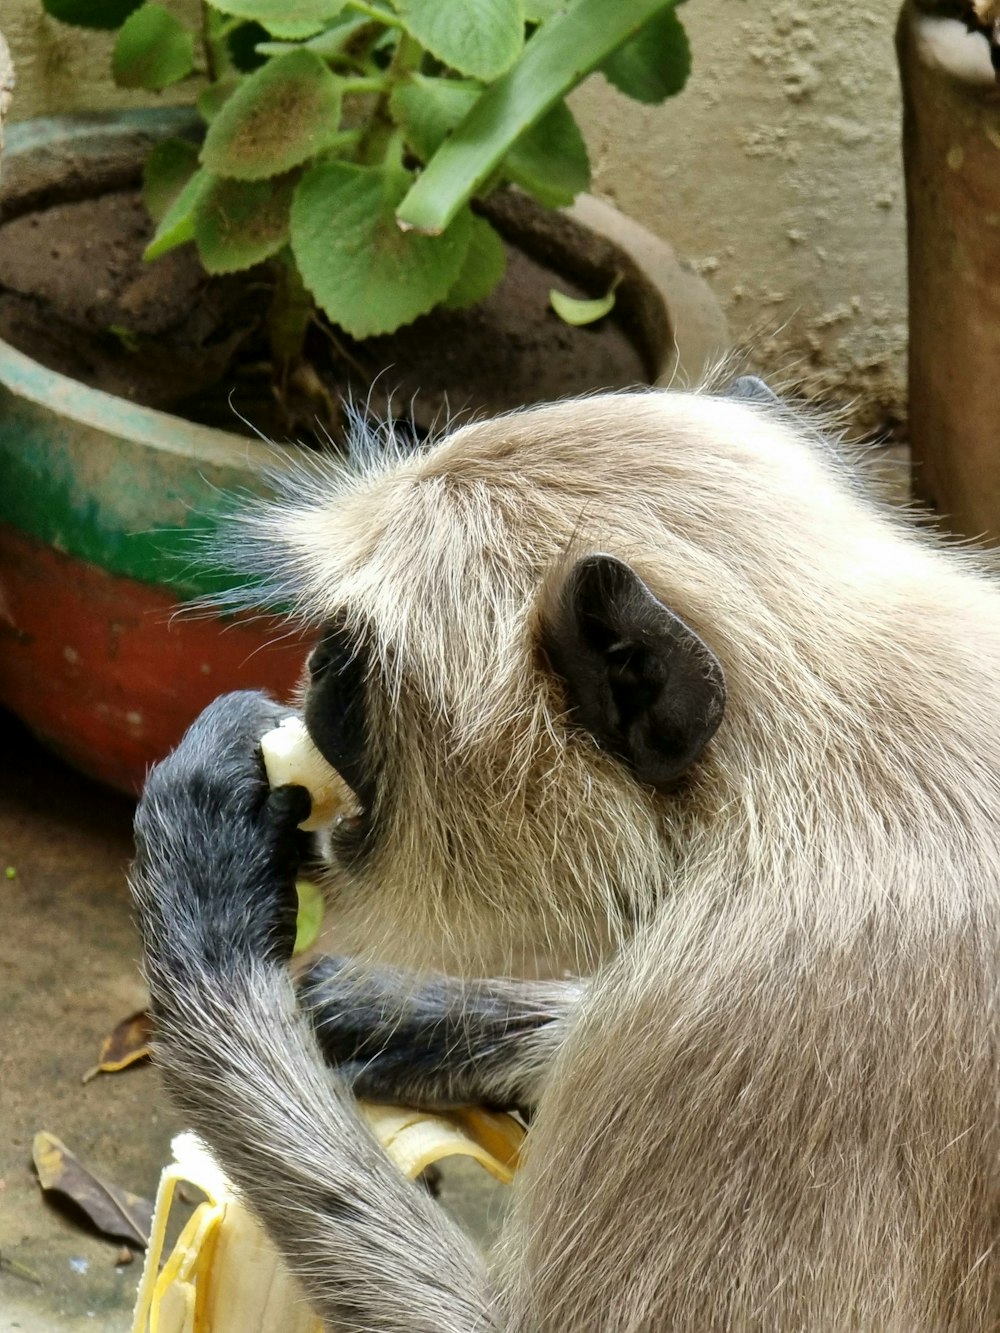 a monkey is eating a banana in front of a potted plant